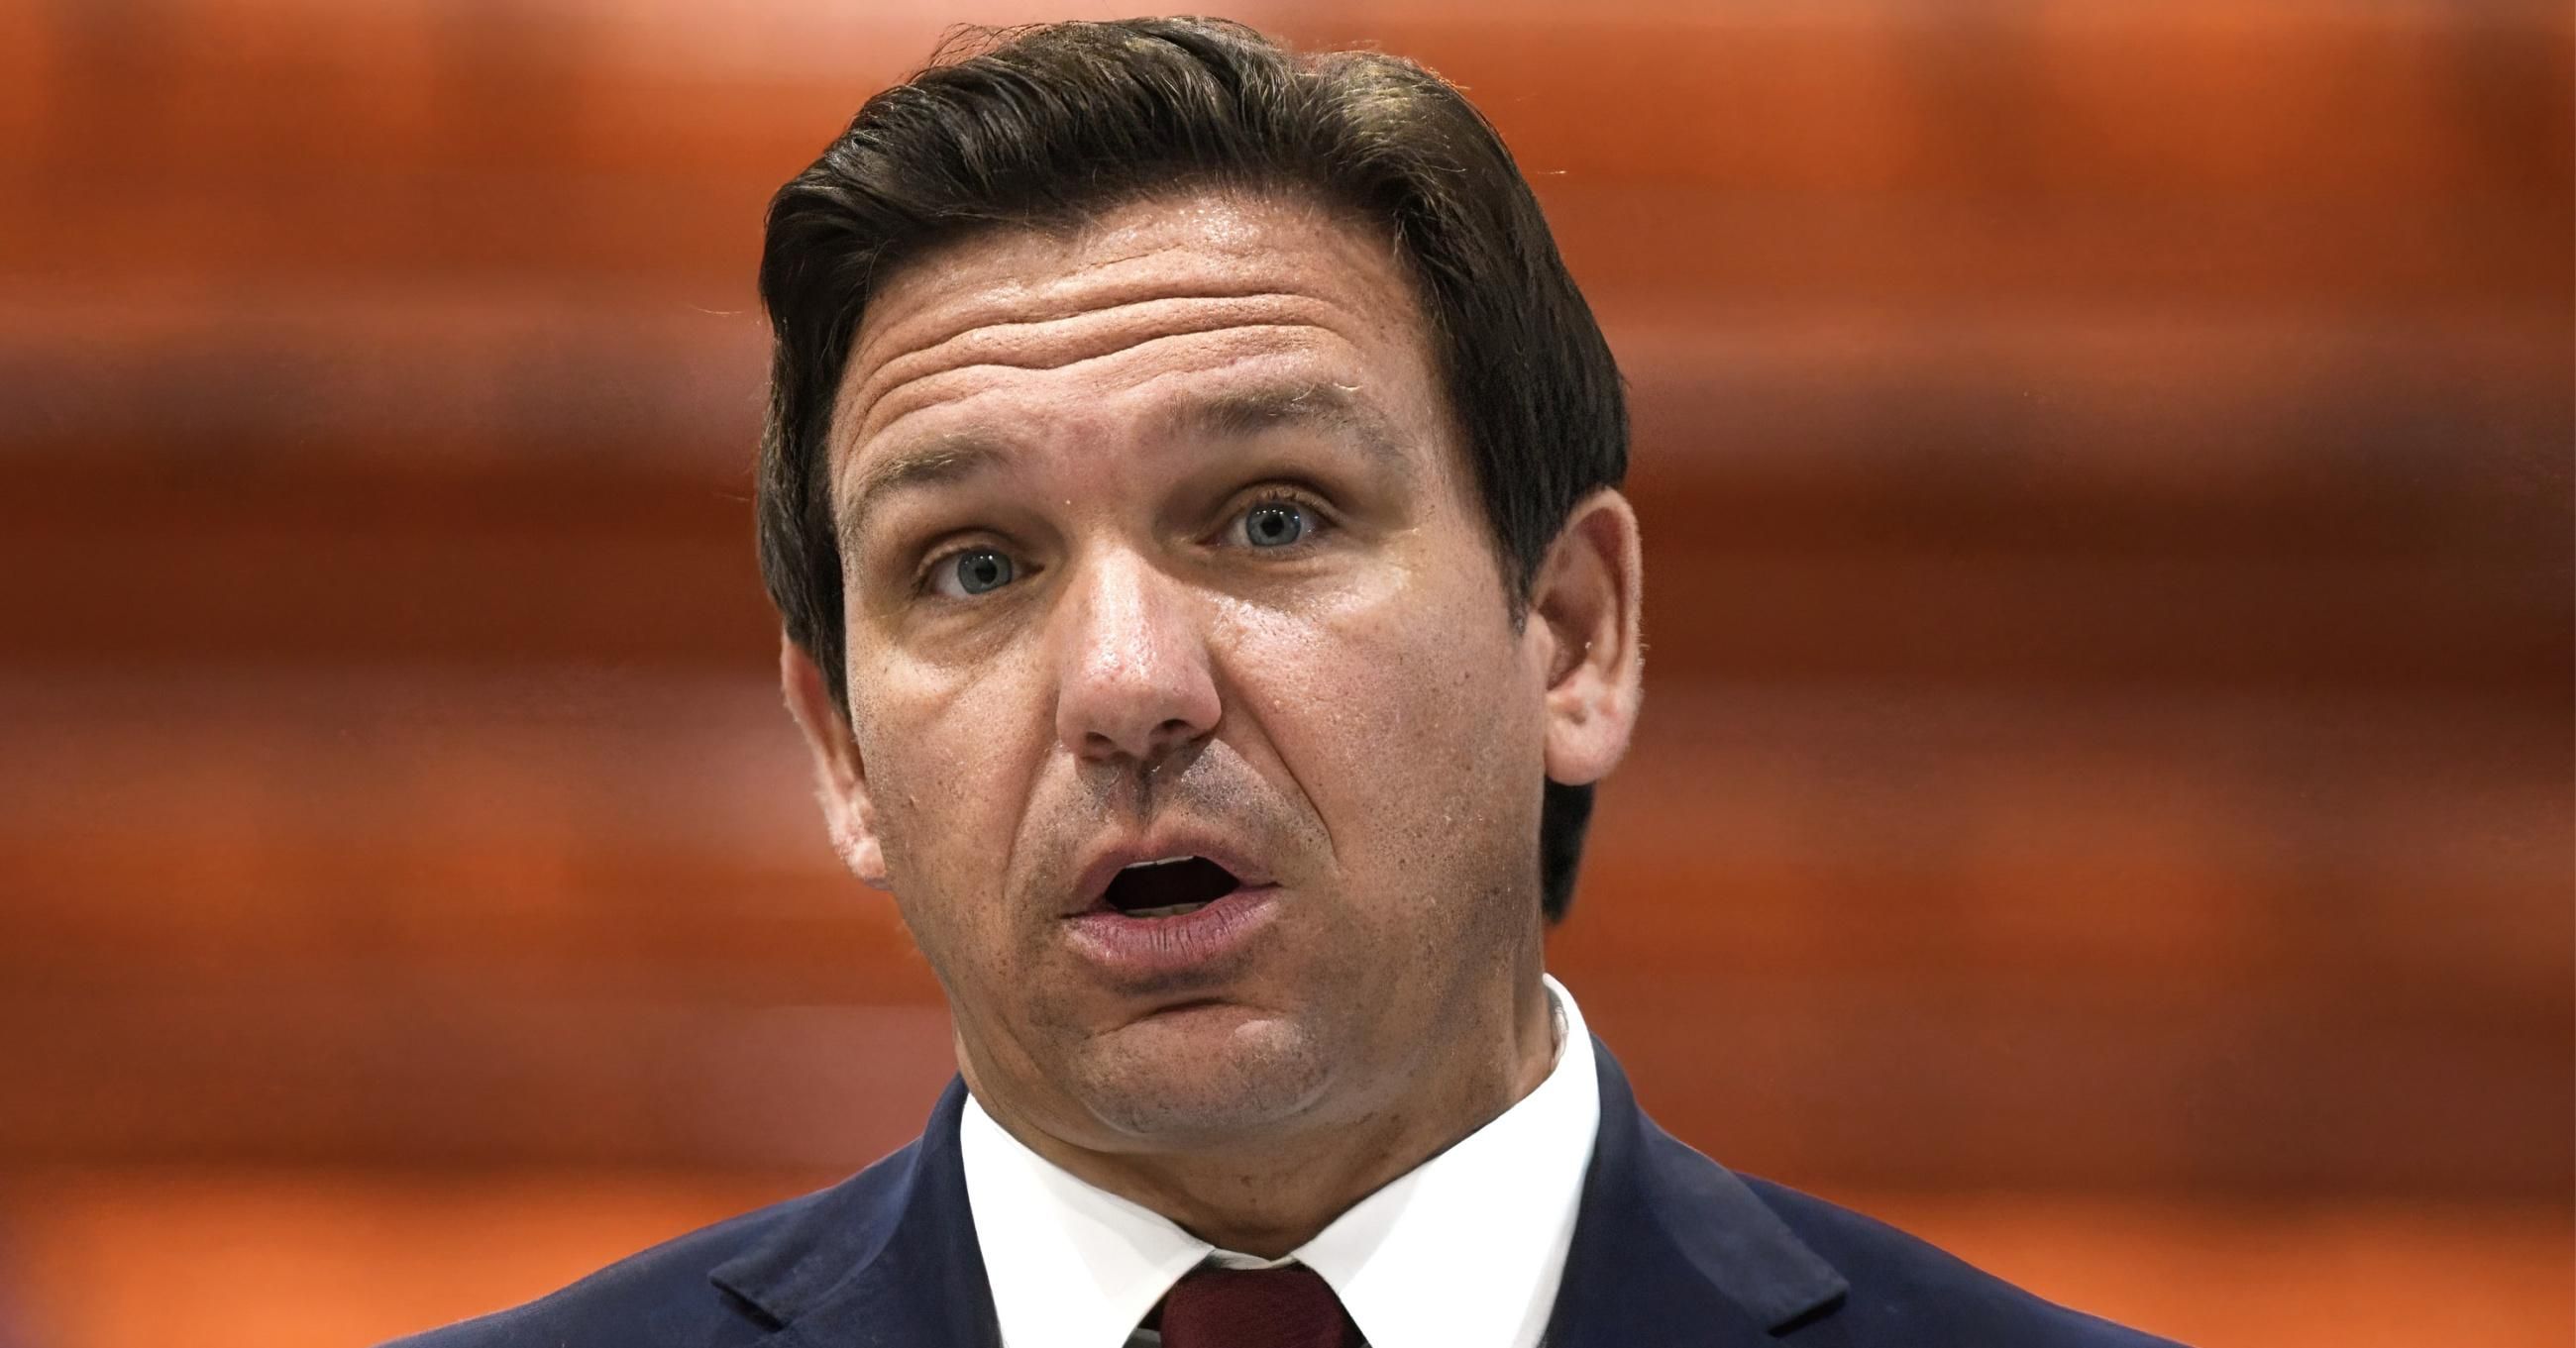 Florida Gov. Ron DeSantis, a Republican, speaks at a press conference at LifeScience Logistics in Lakeland on May 28, 2021.